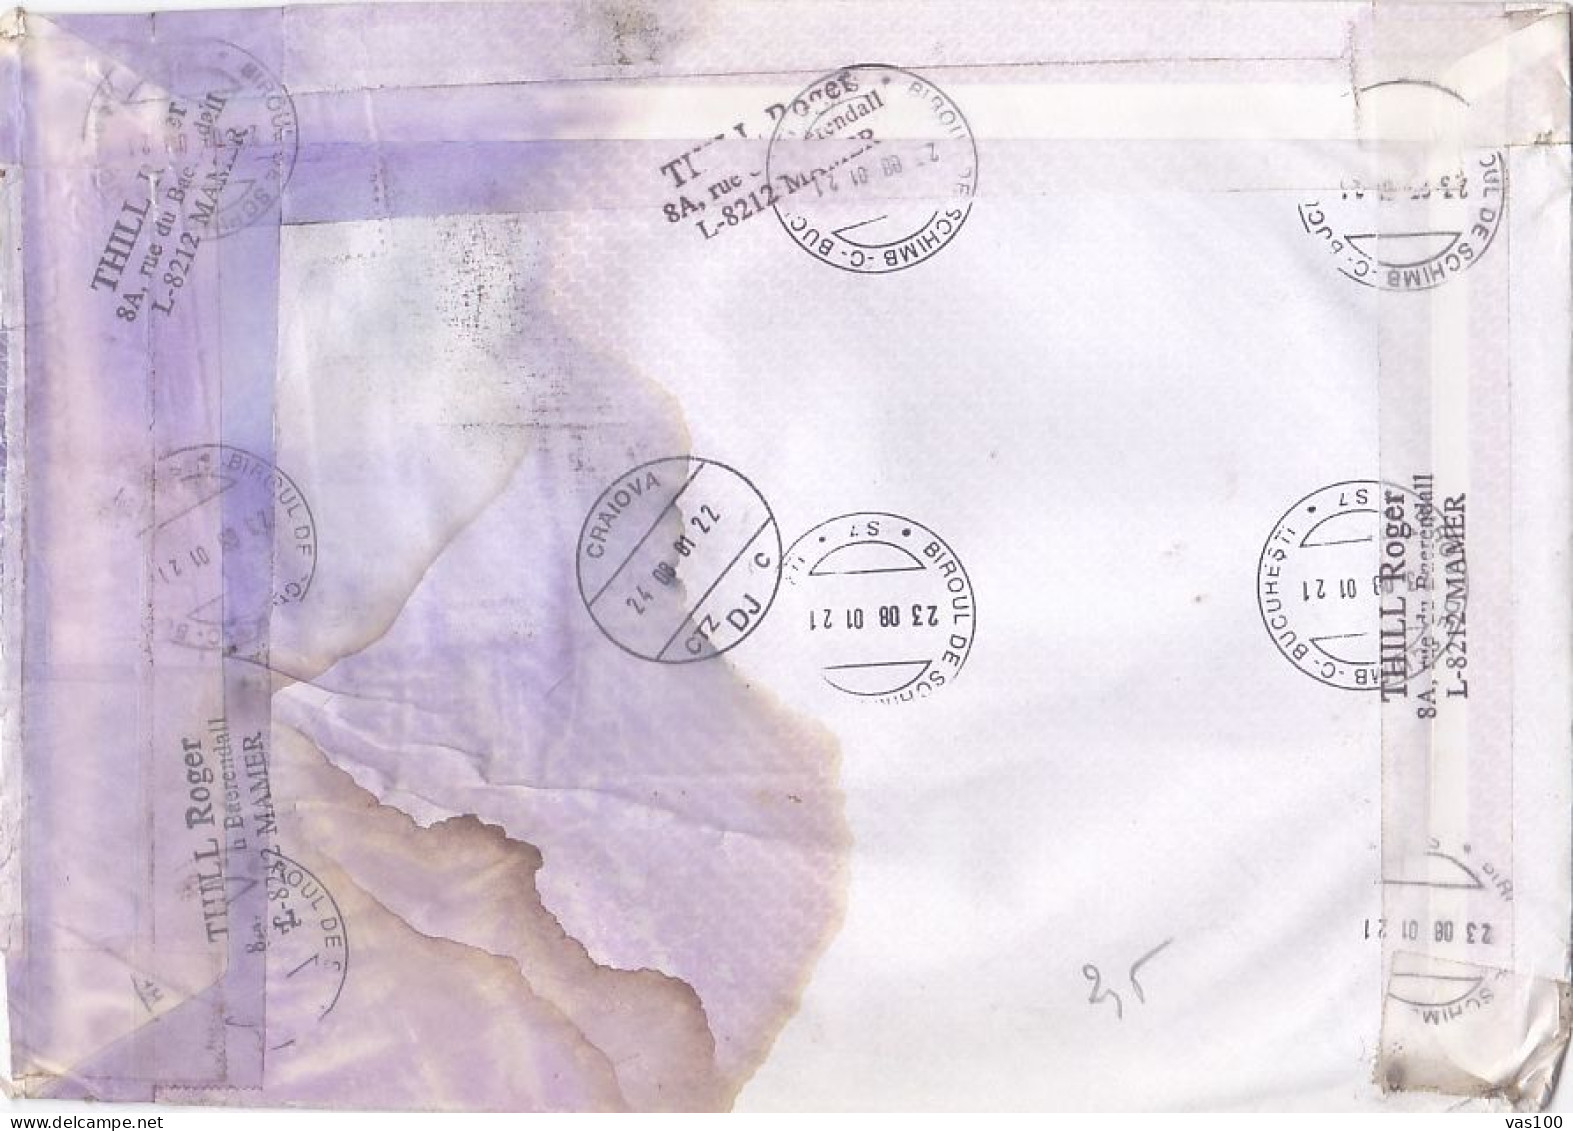 PLANE, FIRST CAR, MONUMENT, TOWER, FROG, FIREFIGHTERS, STAMPS ON REGISTERED COVER, 2001, LUXEMBOURG - Storia Postale